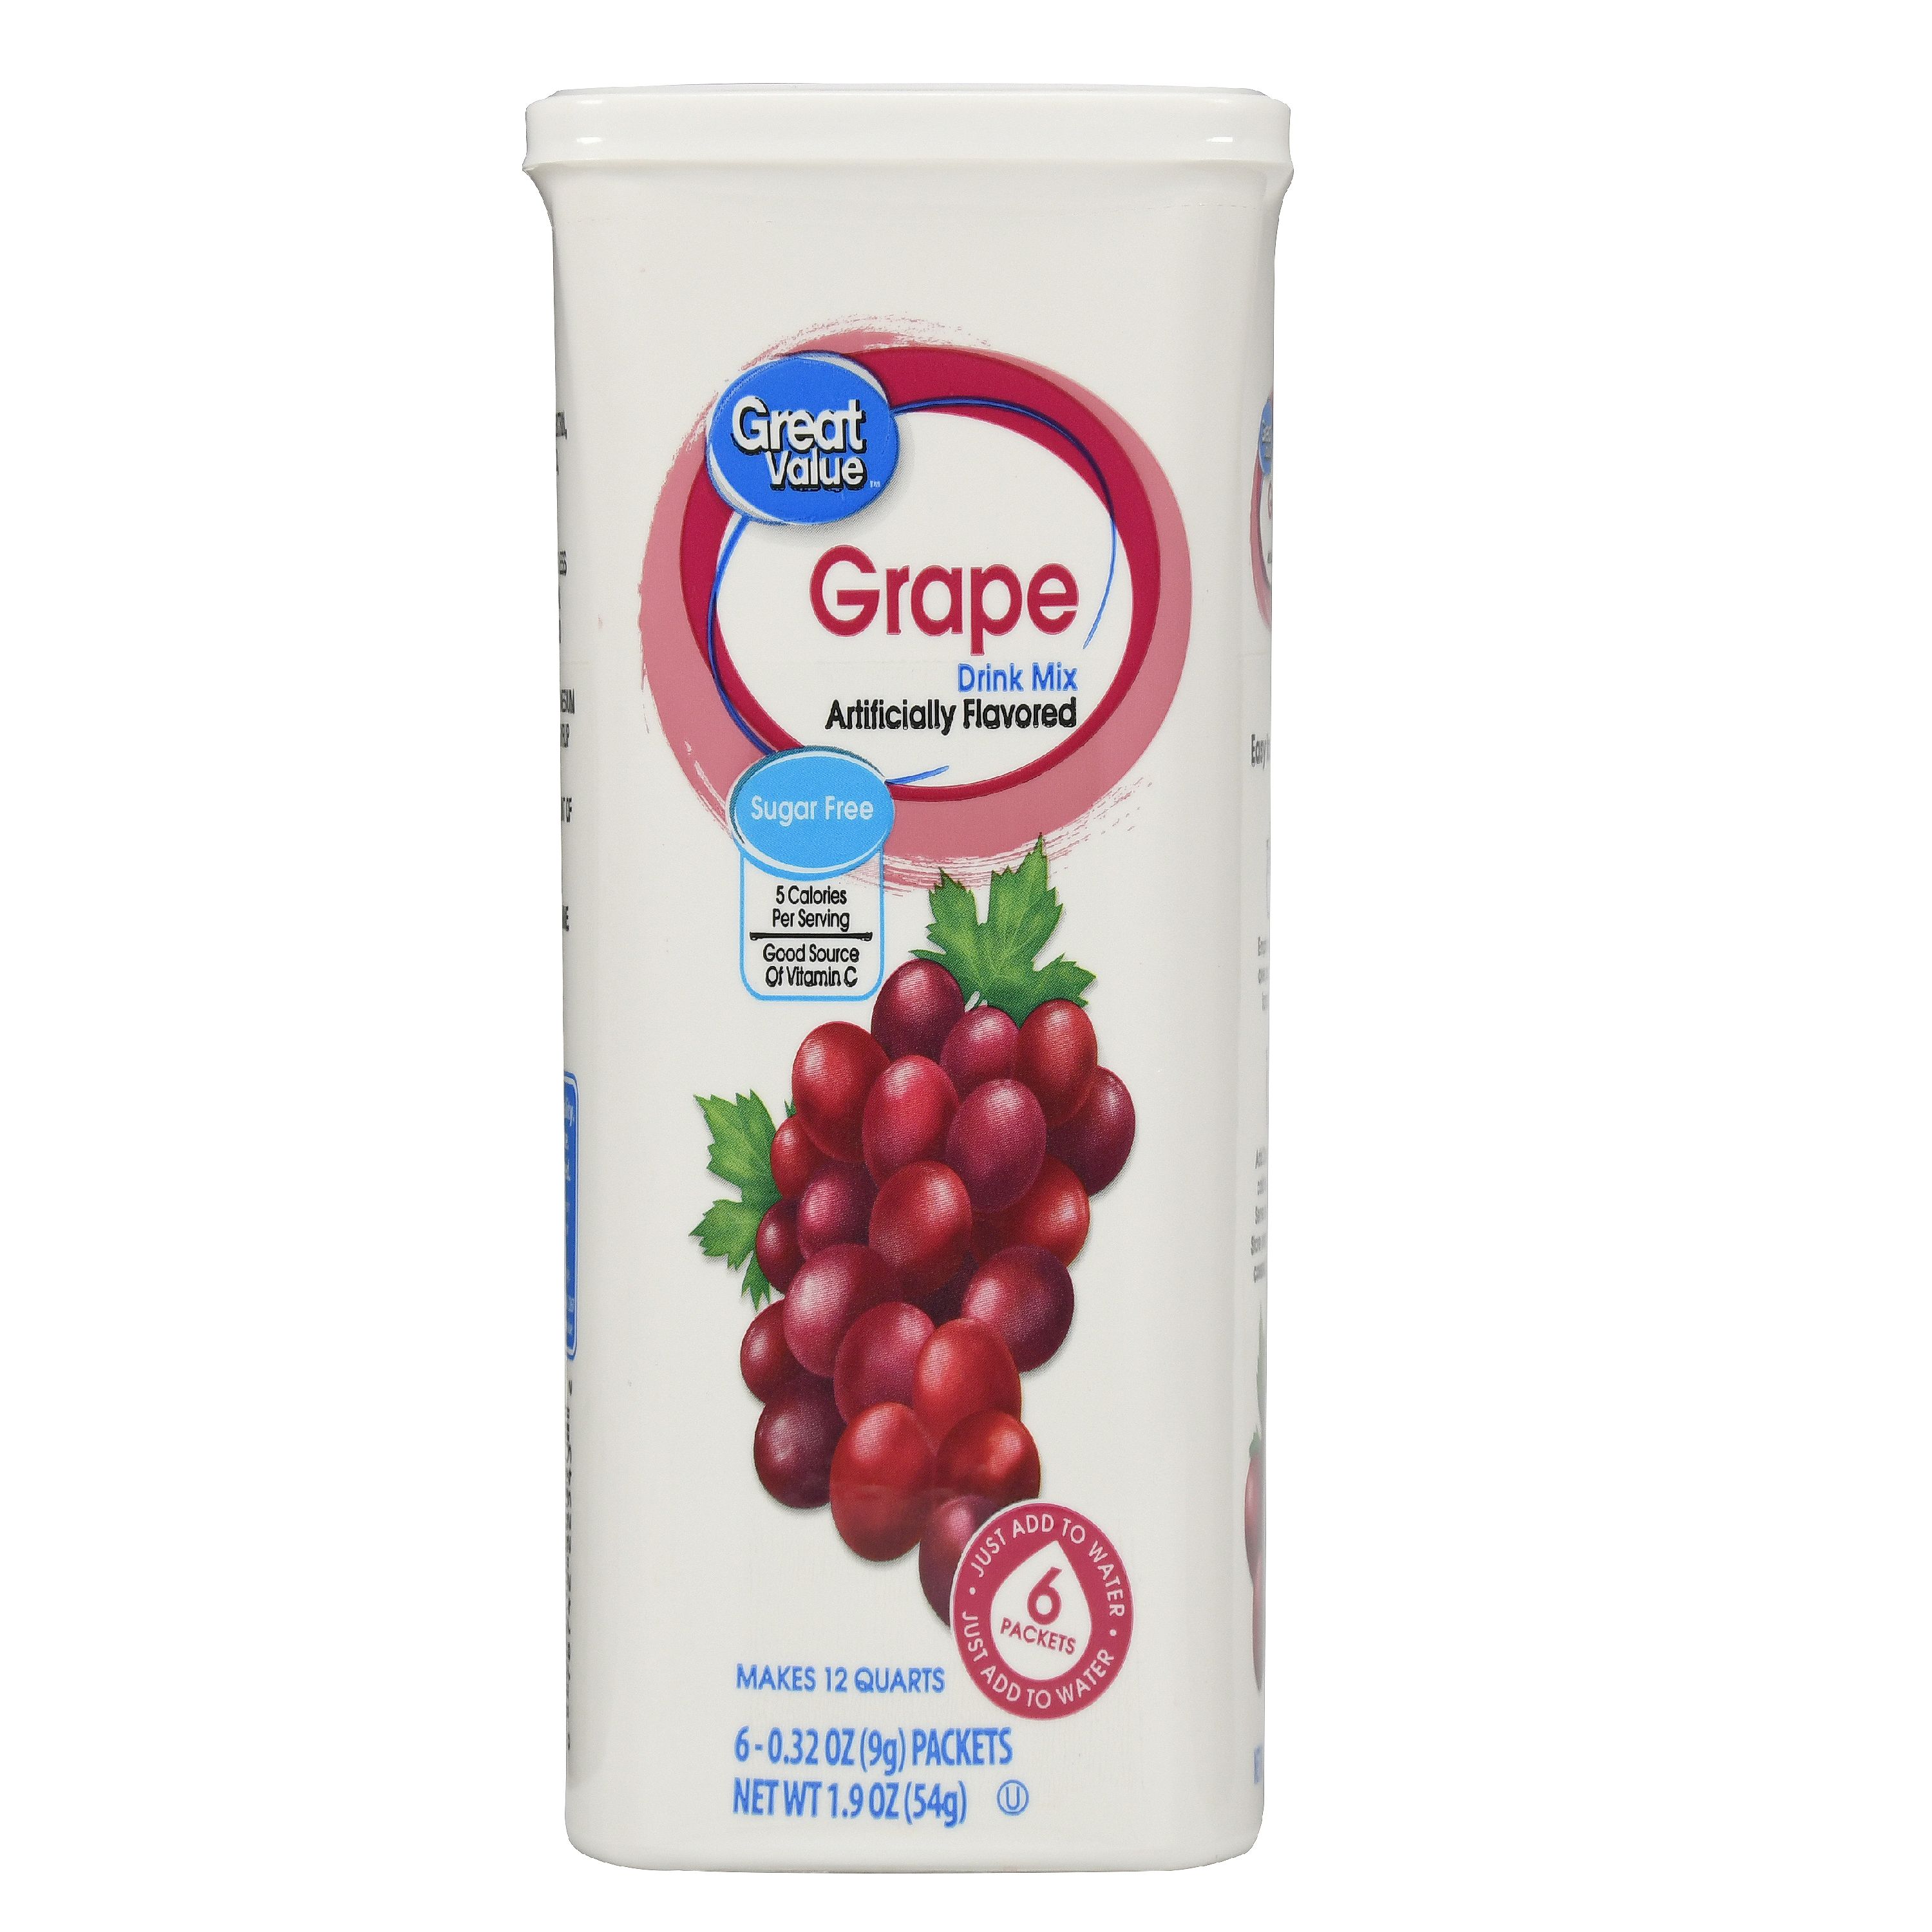 (18 Packets) Great Value Grape Sugar-Free Drink Mix Image